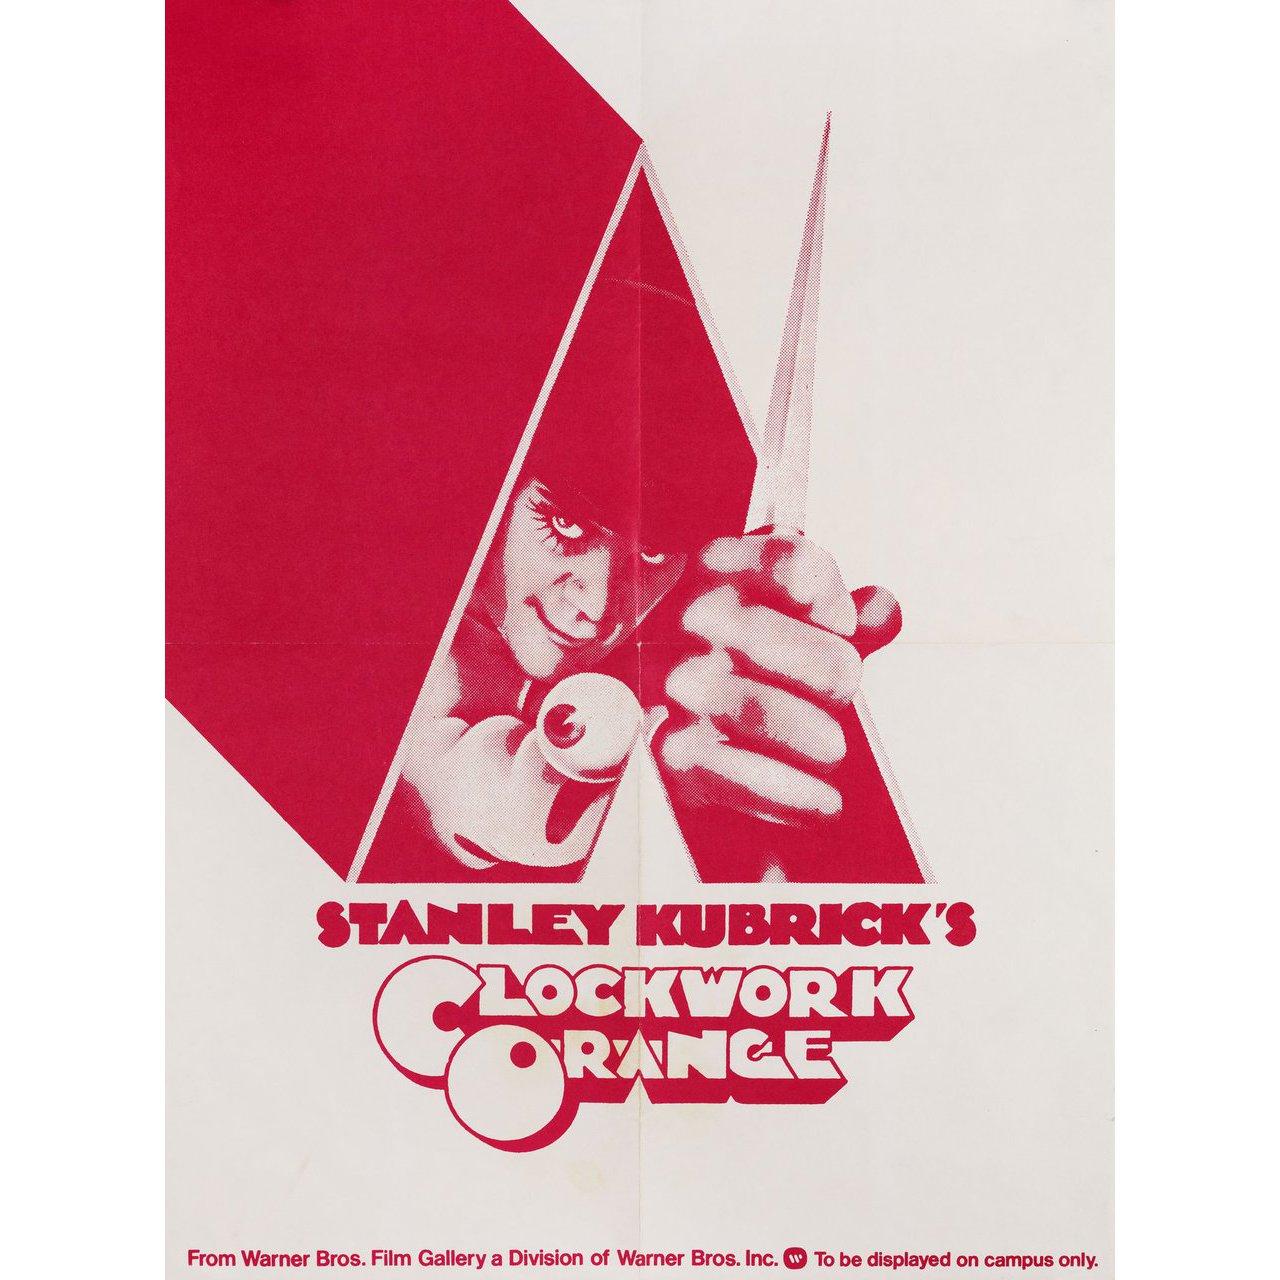 Original 1972 U.S. mini poster for the film A Clockwork Orange directed by Stanley Kubrick with Malcolm McDowell / Patrick Magee / Michael Bates / Warren Clarke. Fine condition, folded. Many original posters were issued folded or were subsequently